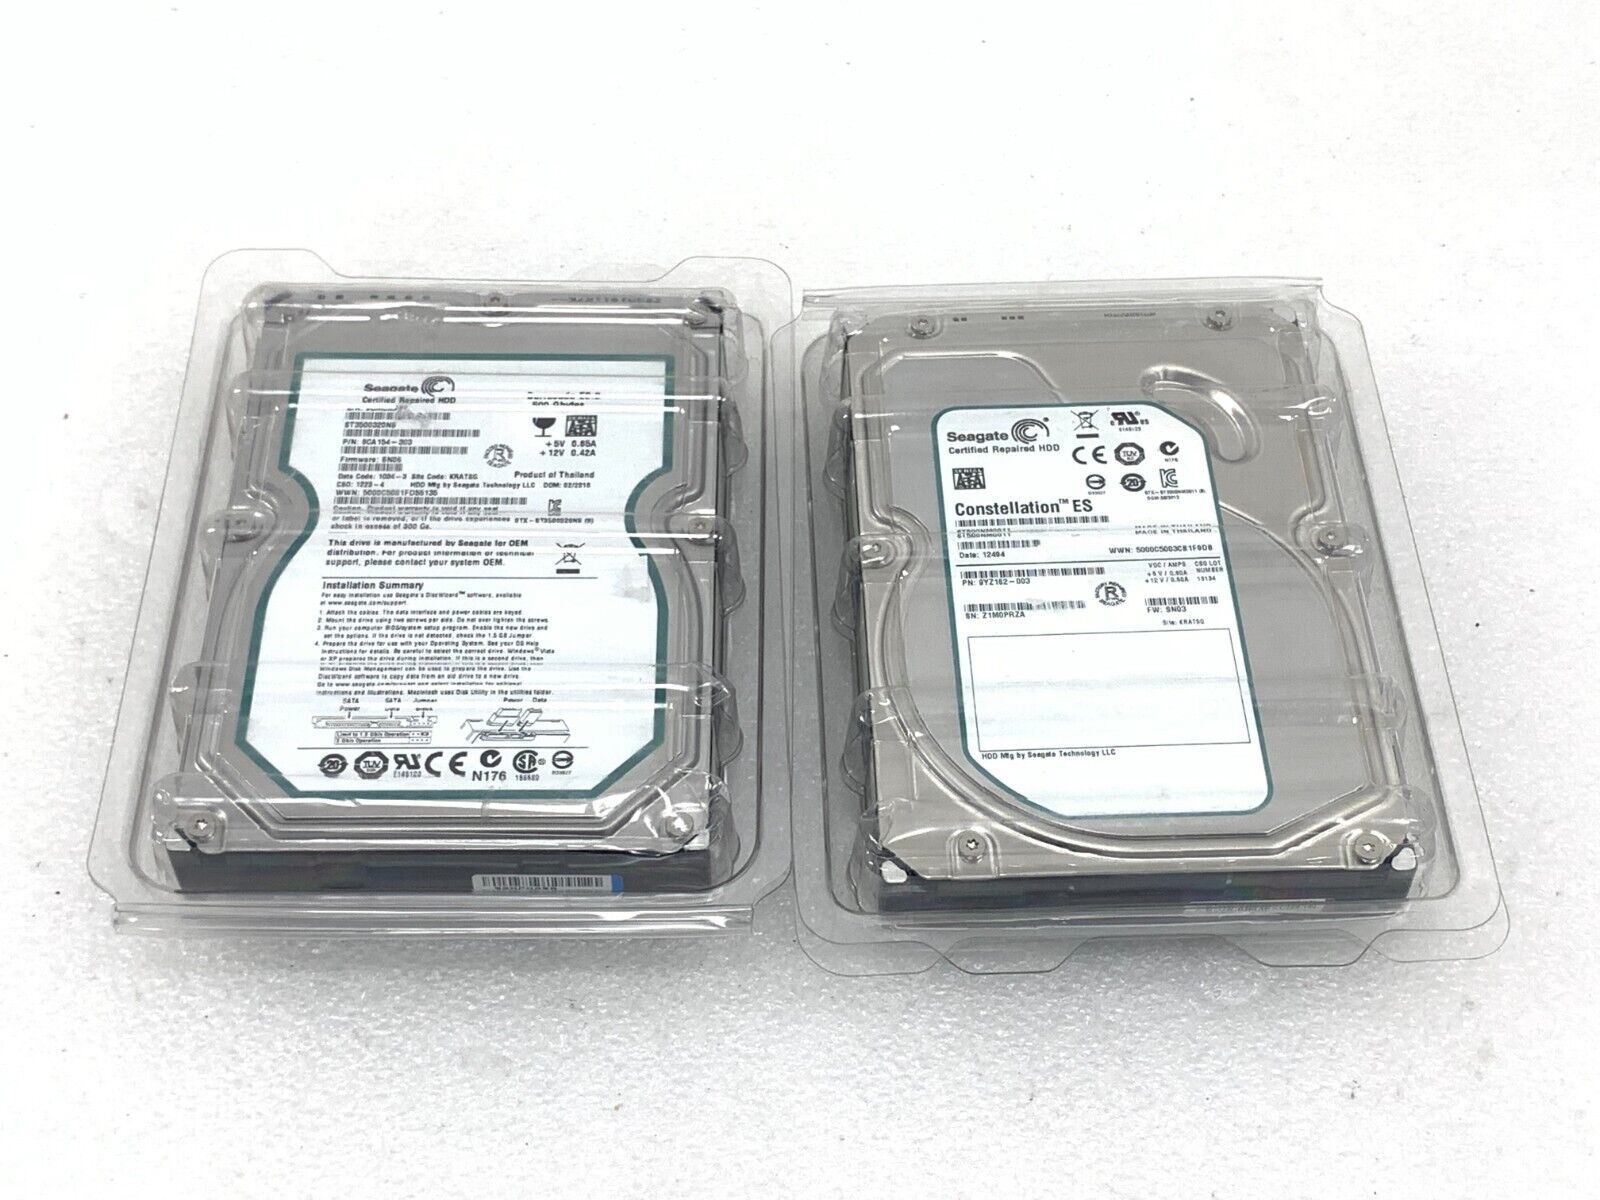 LOT OF 22 NEW  Seagate Constellation ES ST500NM0011 9YZ162-003 HDD NICE DEAL 